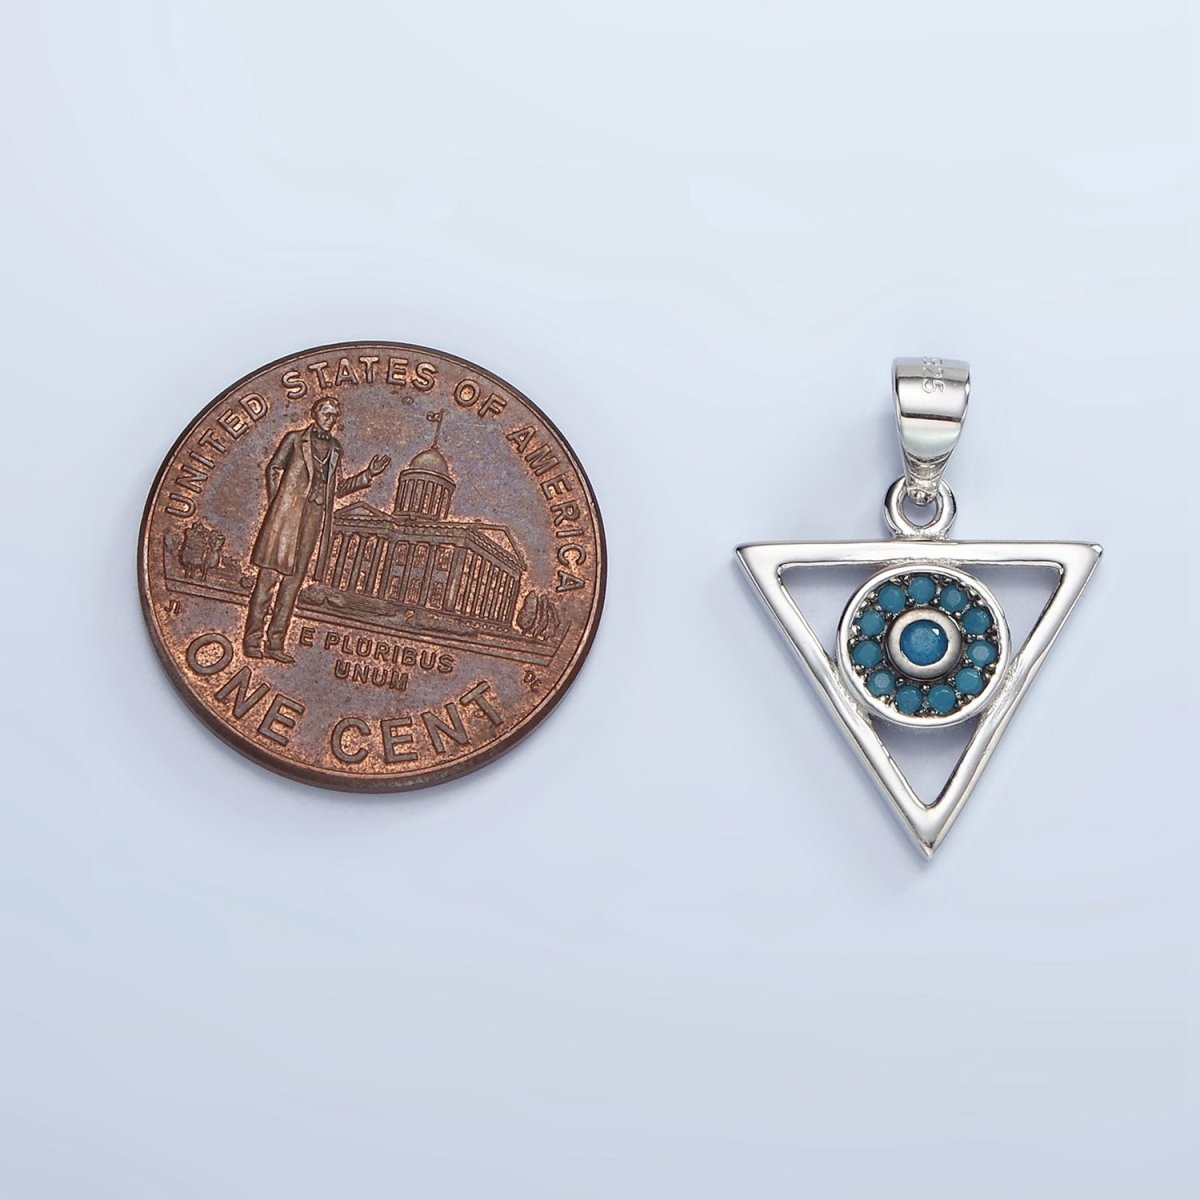 S925 Sterling Silver Evil Eye Turquoise Micro Paved Open Triangle Pendant | SL-464 - DLUXCA